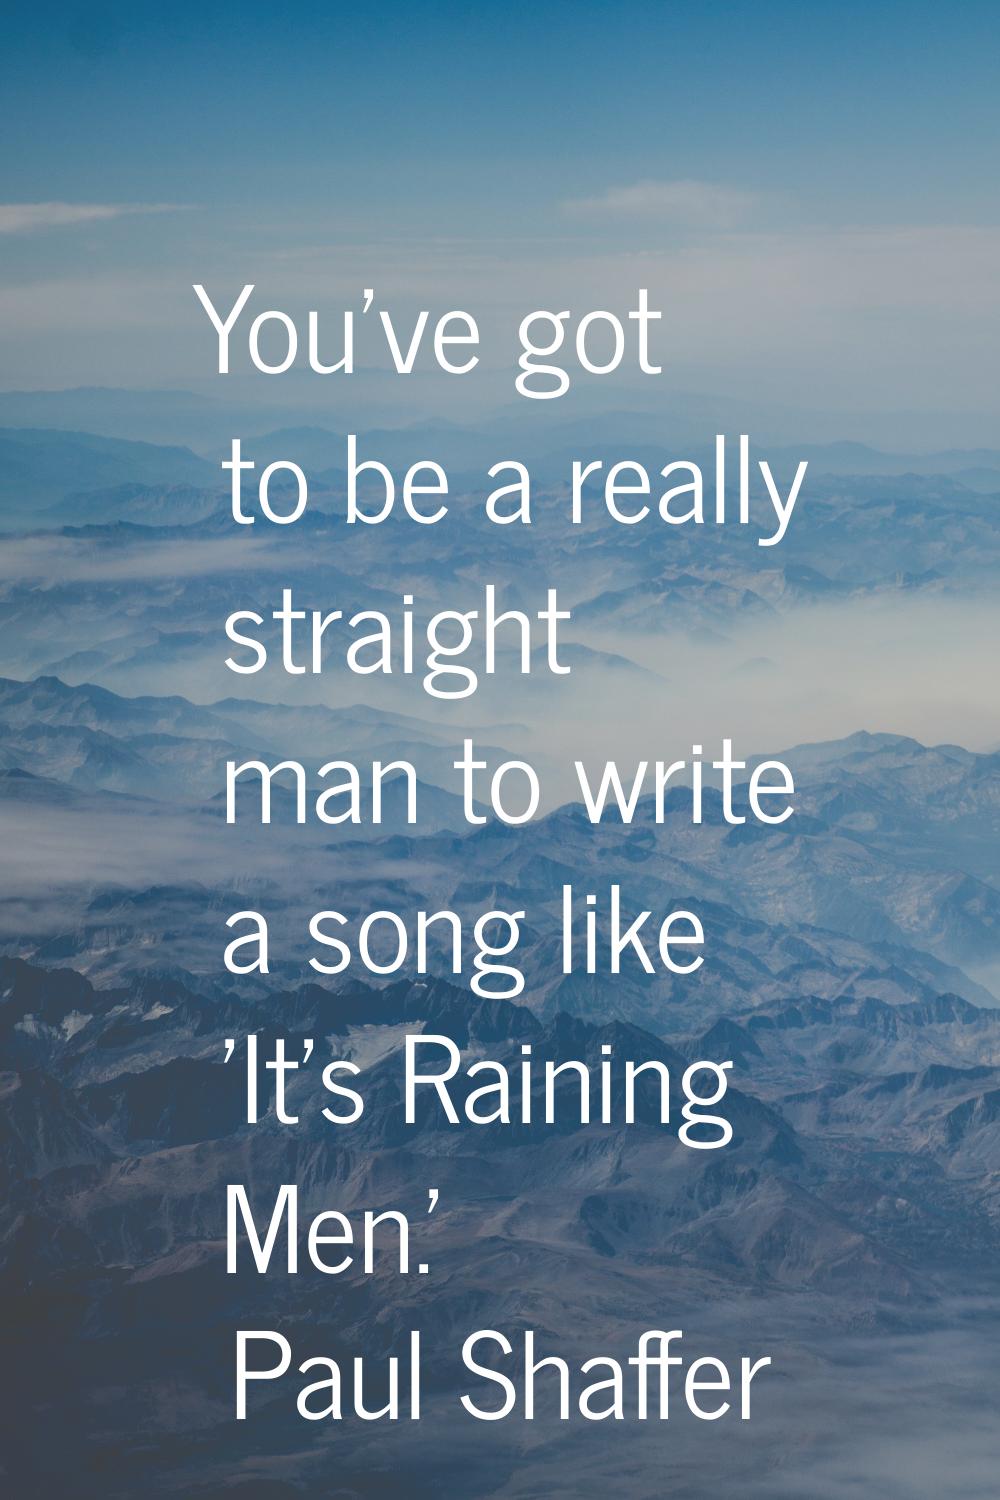 You've got to be a really straight man to write a song like 'It's Raining Men.'